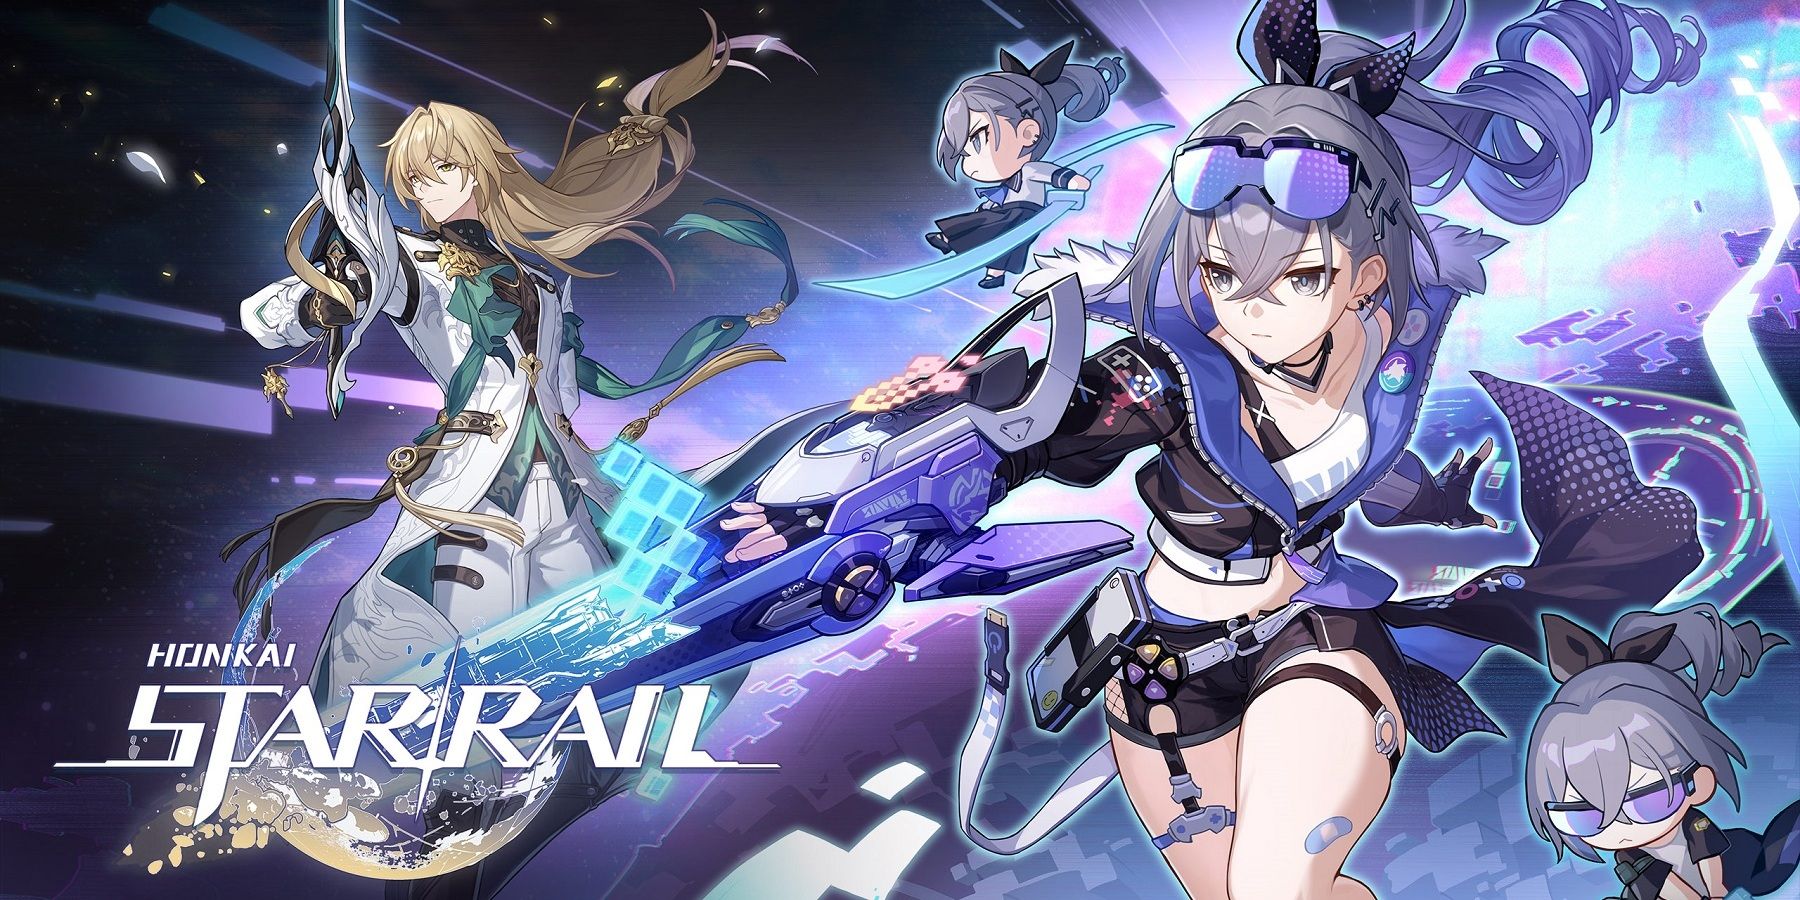 Honkai Star Rail 1.3 pre-download: Download and install sizes detailed